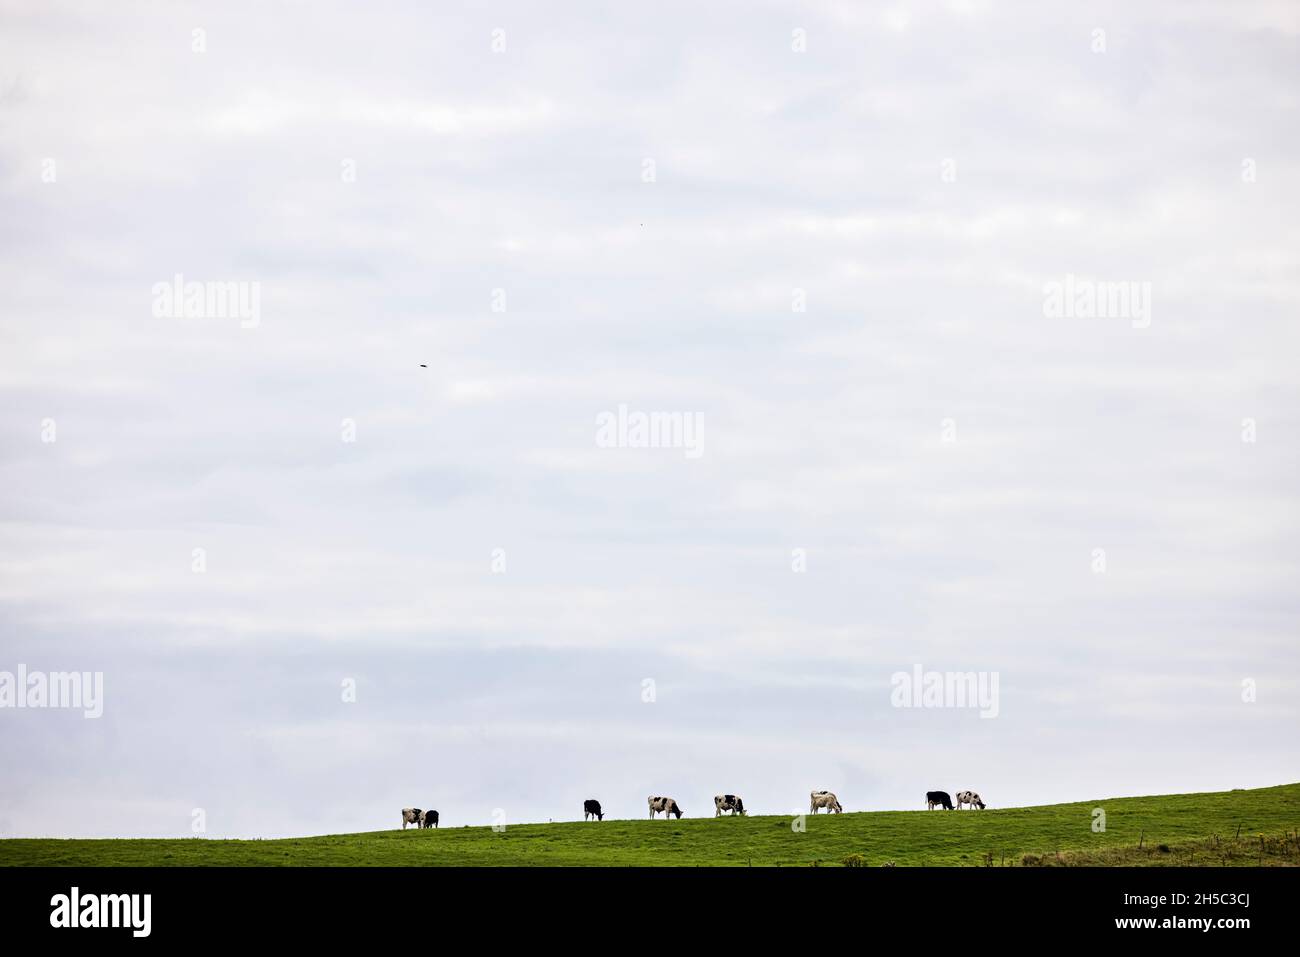 Cattle grazing in a pasture on a hilltop with a large open sky above, near Kinsale, County Cork, Ireland Stock Photo